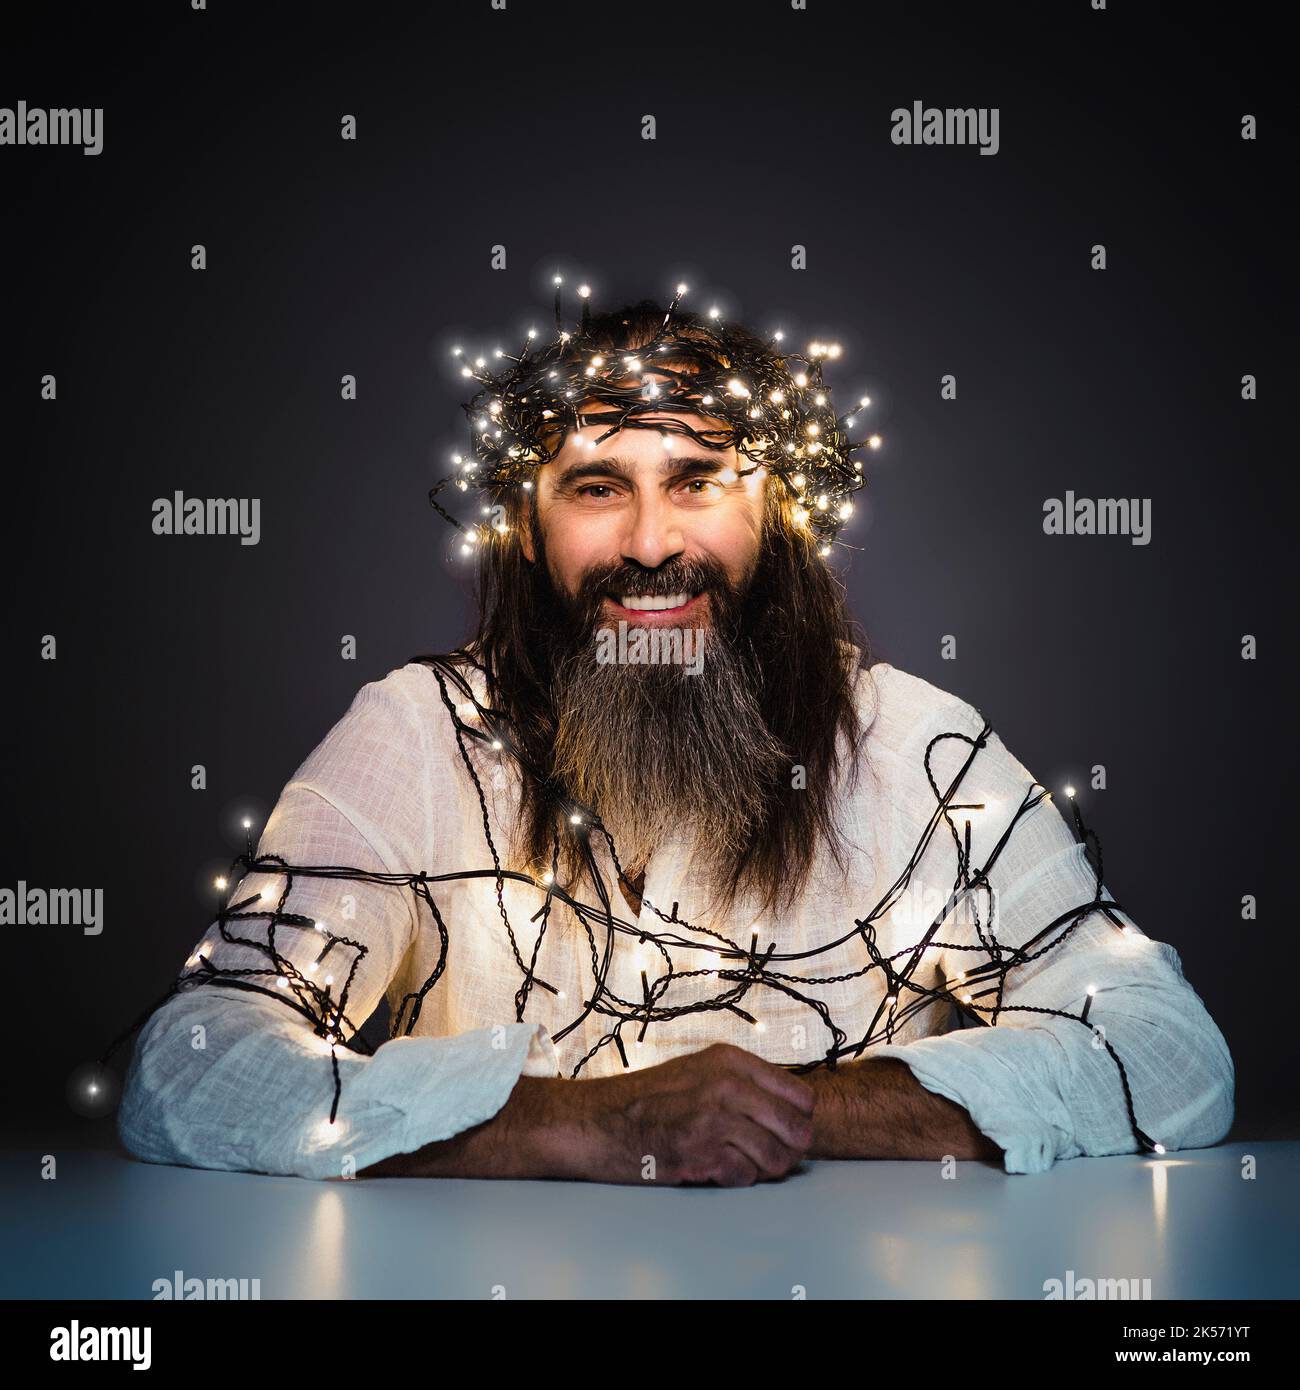 man with beard and long hair smiling with christmas lights Stock Photo